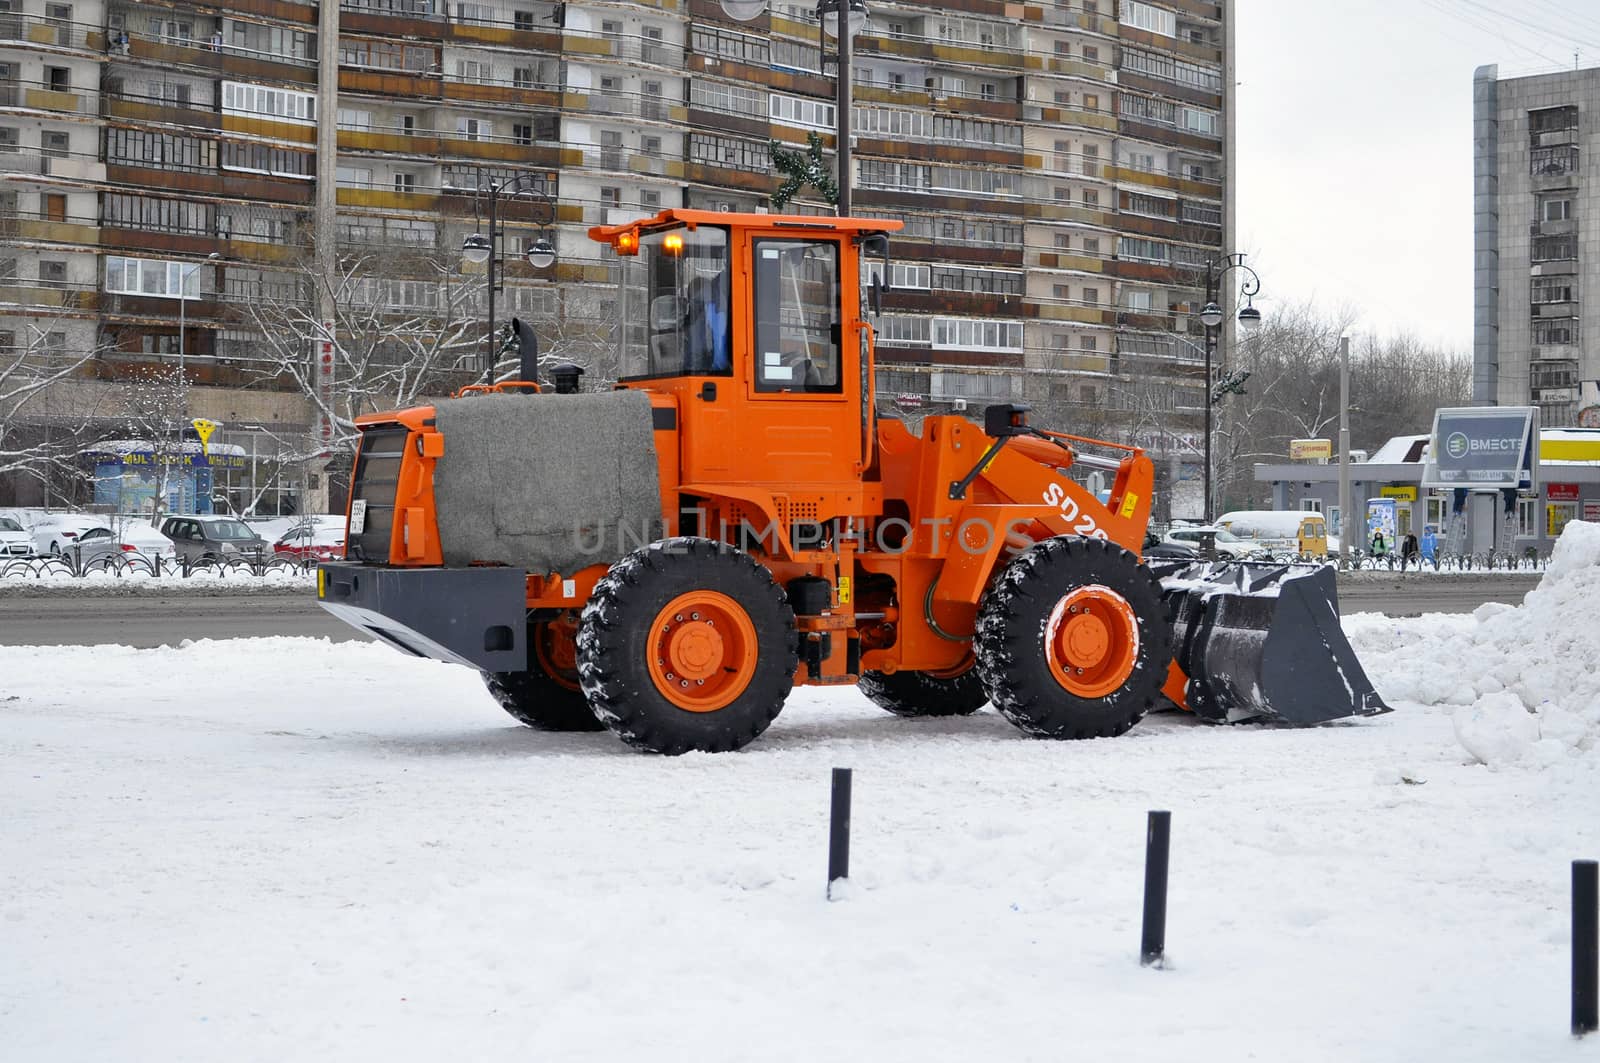 The bulldozer occupied with snow cleaning costs on the street in the city of Tyumen